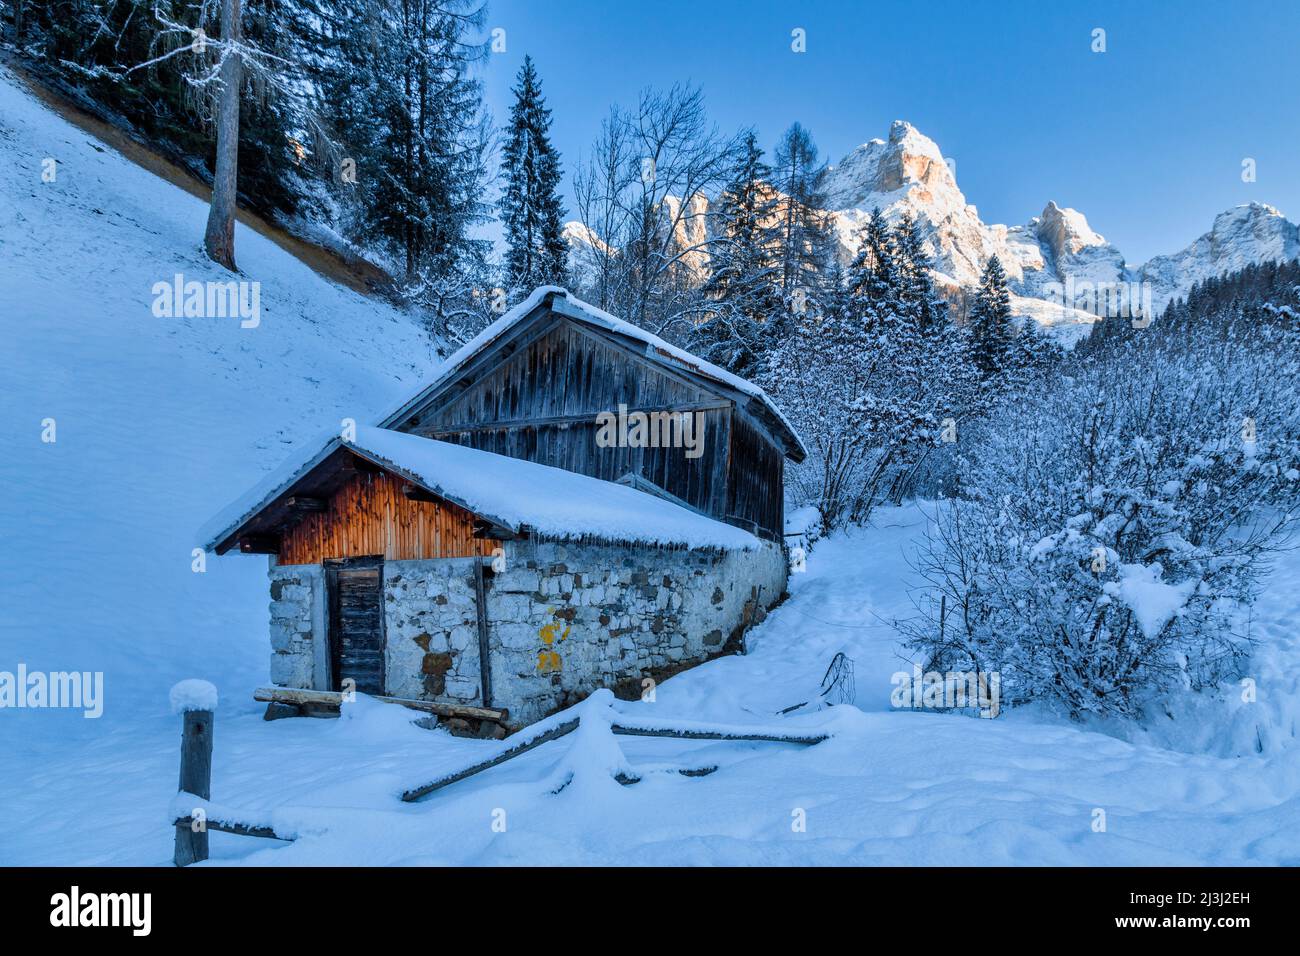 Europe, Italy, Province of Belluno, La Valley Agordina, old rural buildings in winter, snowy landscape, in the background the chain of the San Sebastiano Stock Photo